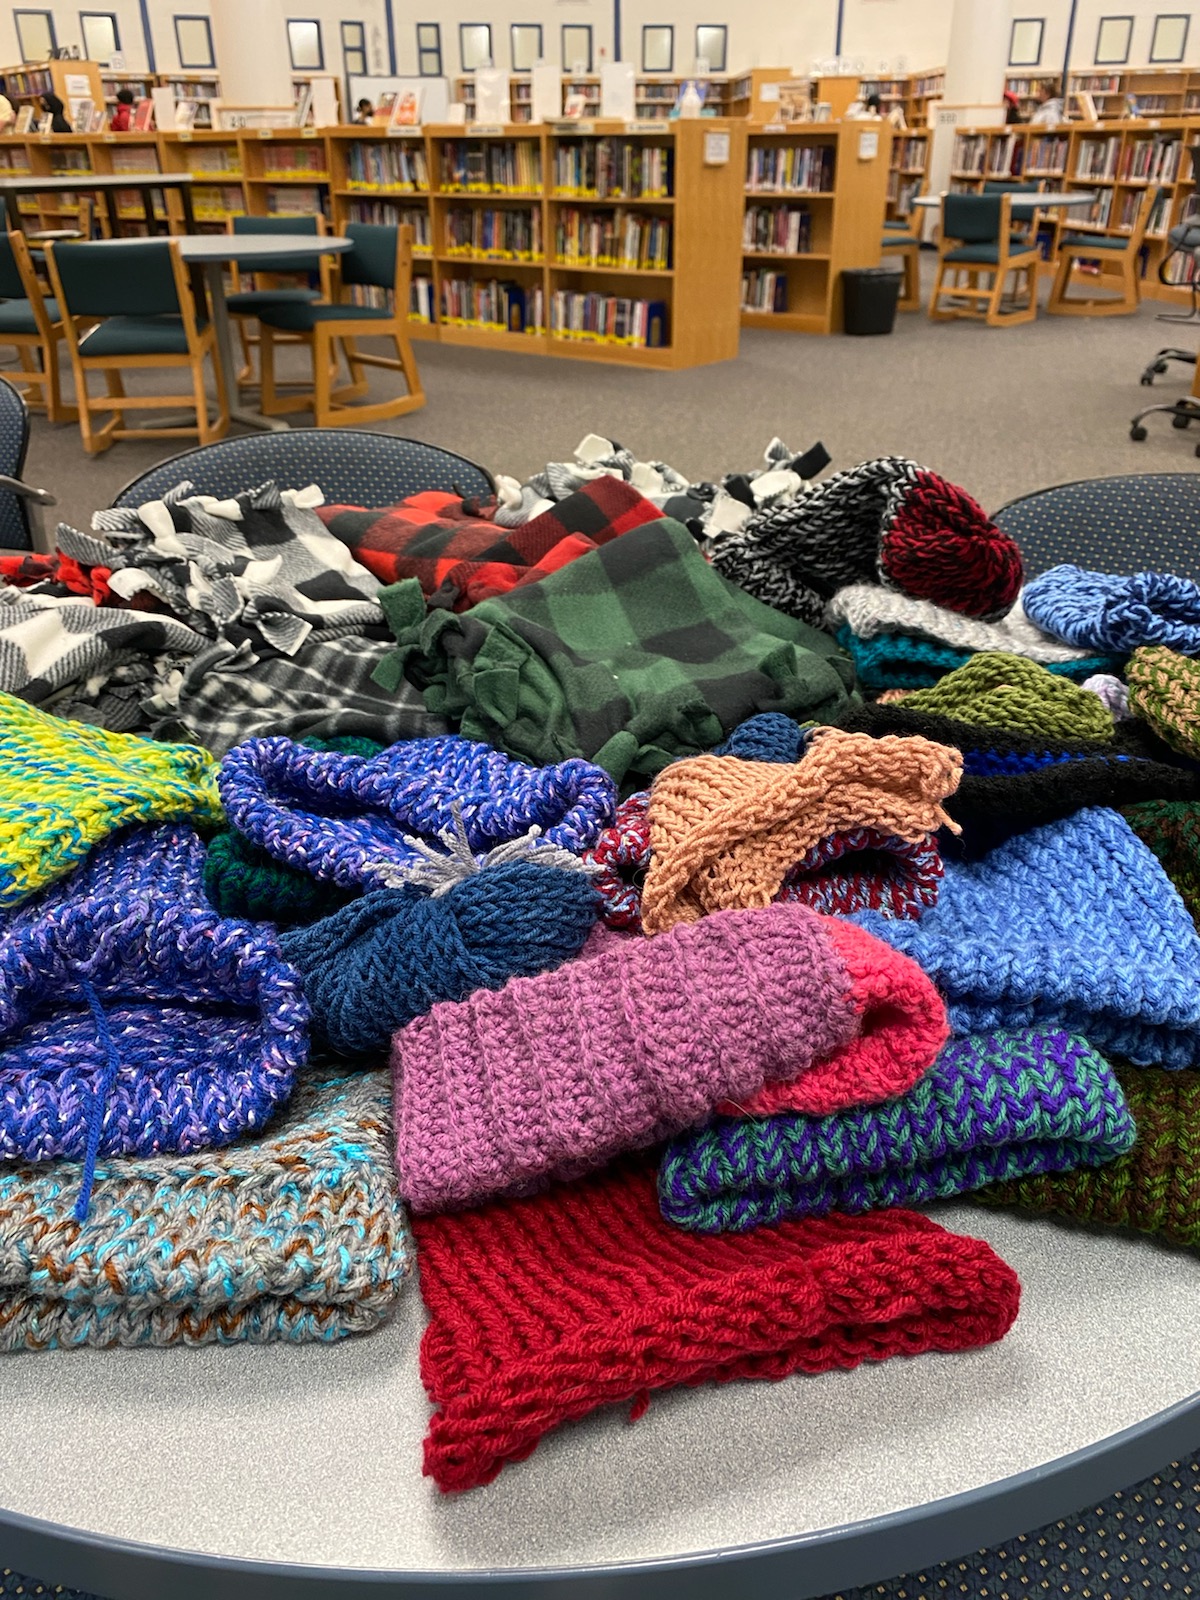 A collection of hats for the homeless and pet blankets for animals shelters made by South County High students in their library.